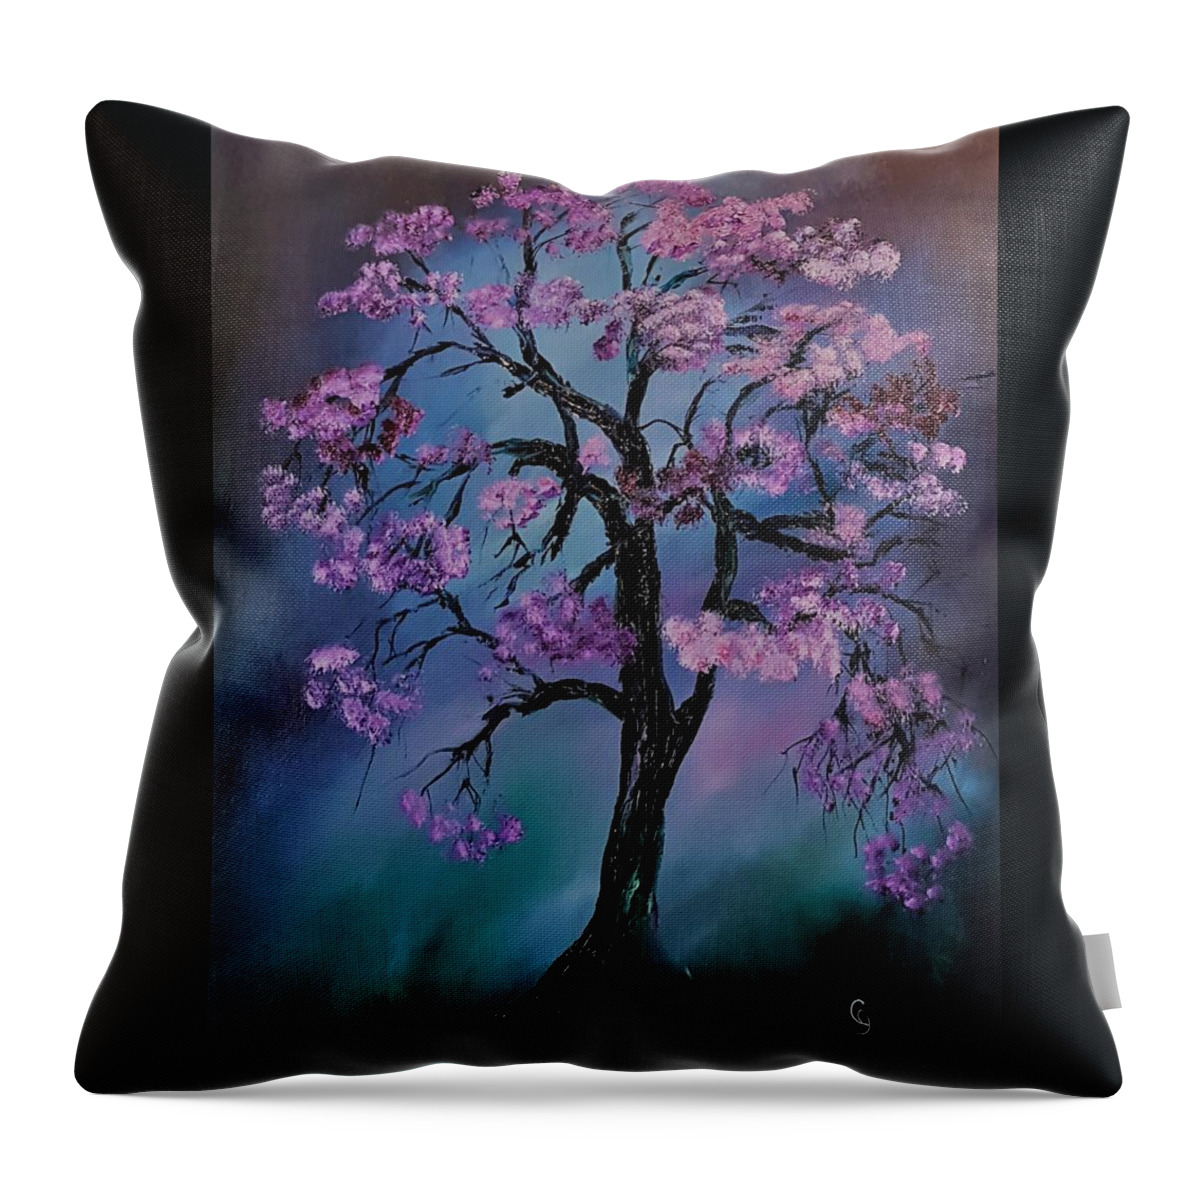 Tree Throw Pillow featuring the painting Magical Tree         66 by Cheryl Nancy Ann Gordon